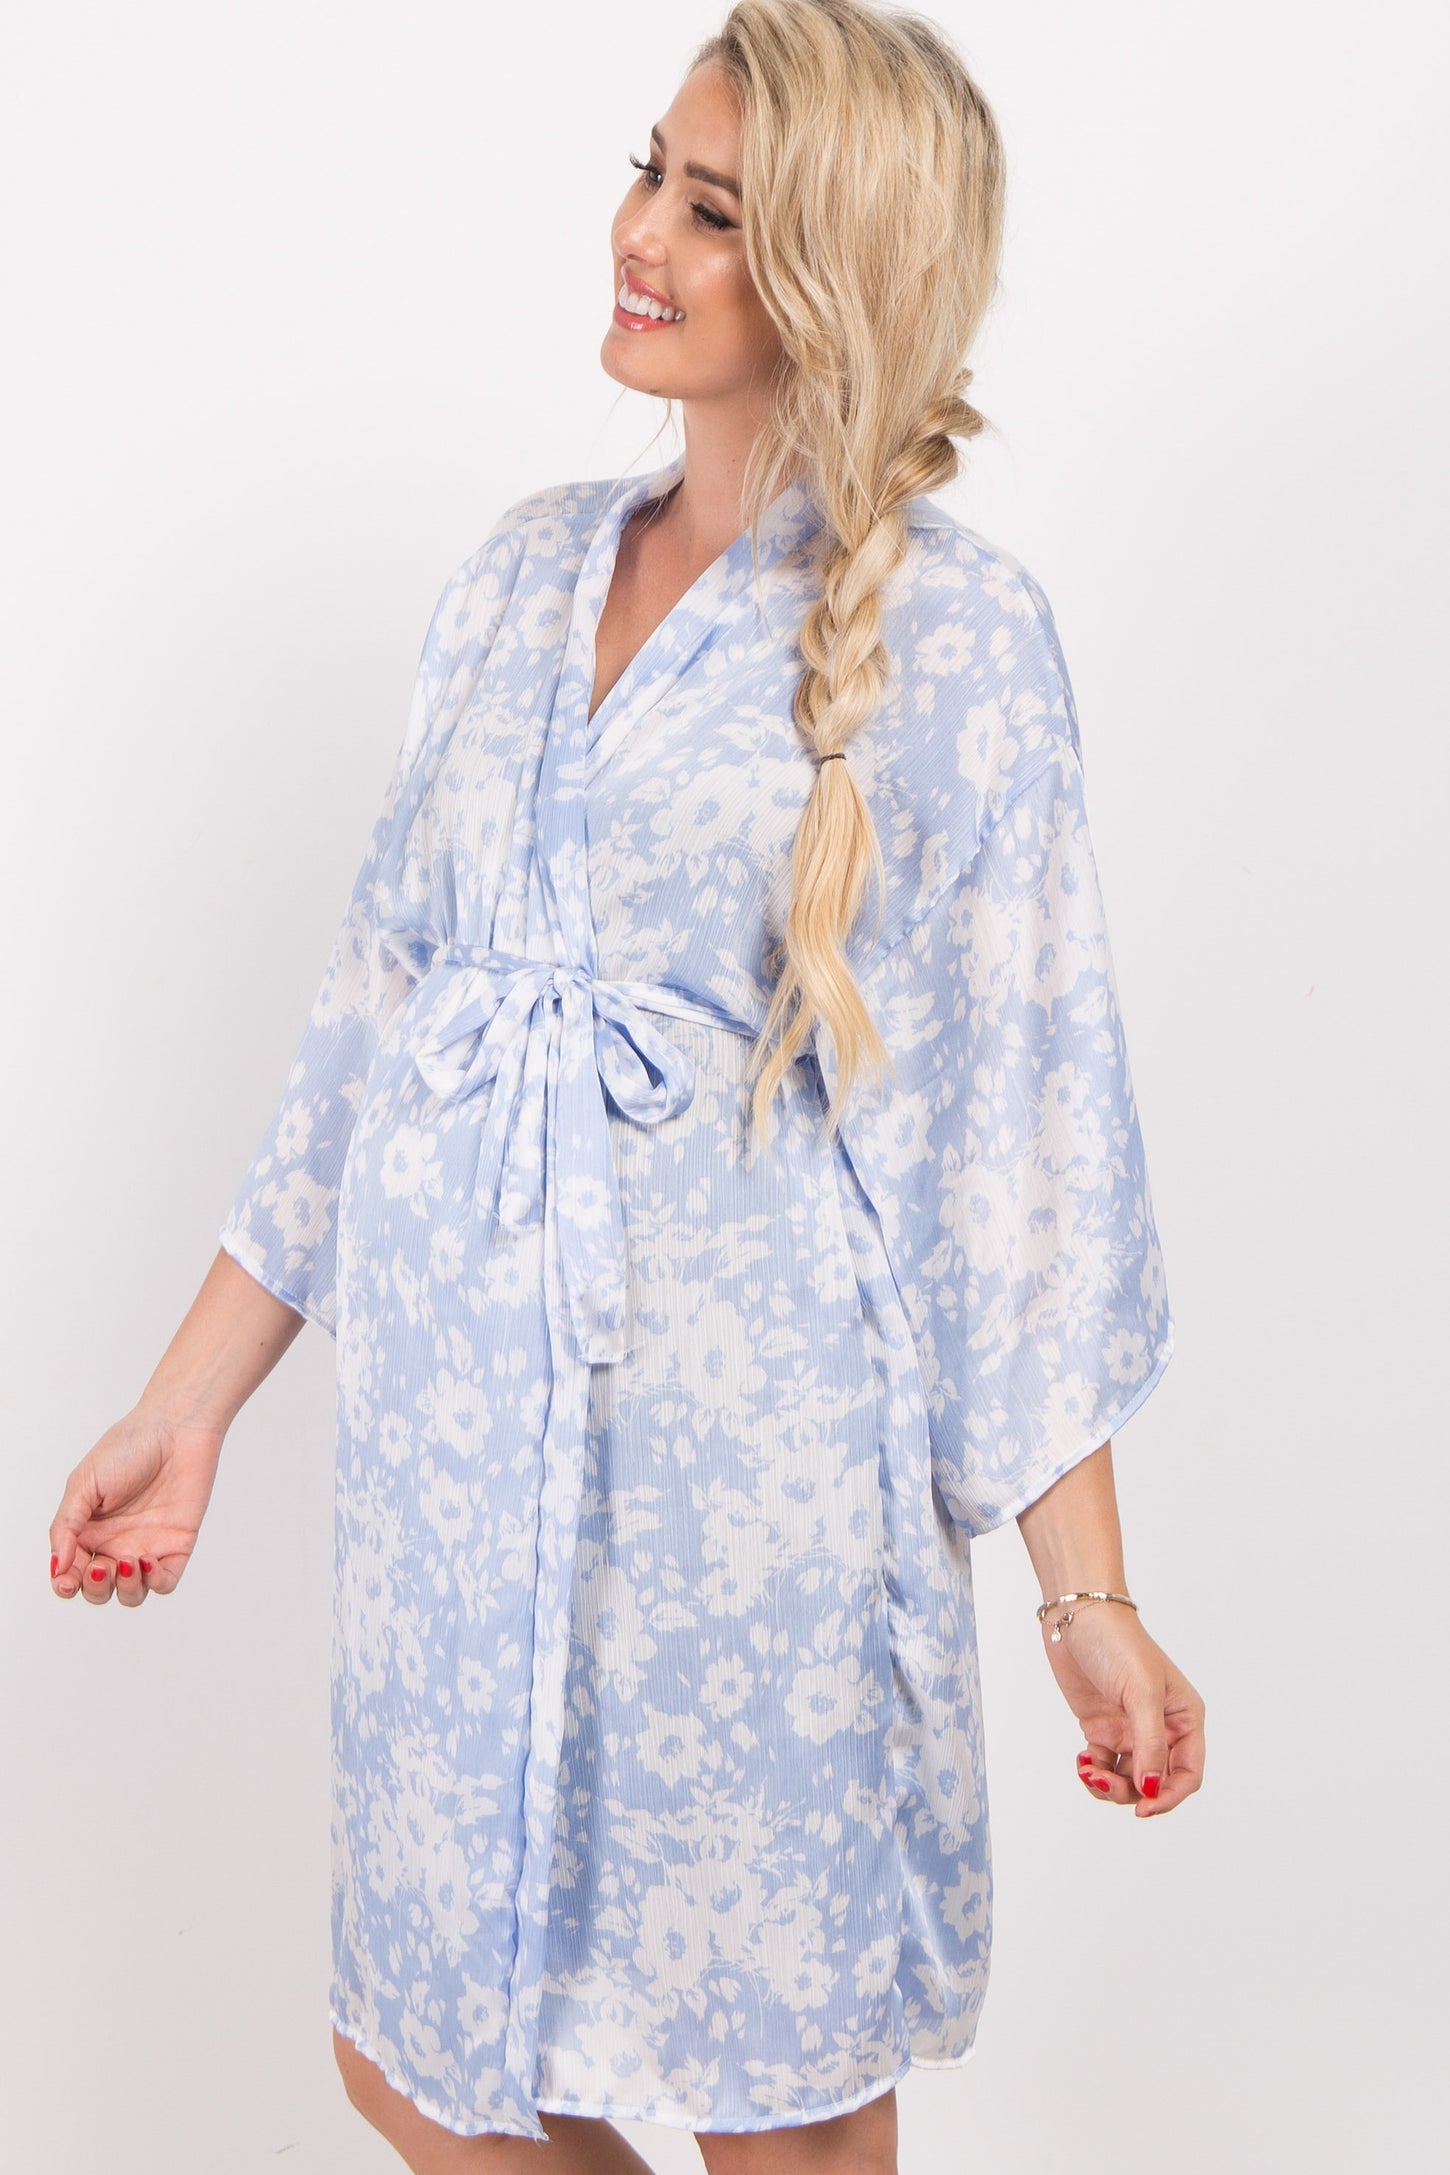 Blue Floral Chiffon Delivery/Nursing Maternity Robe